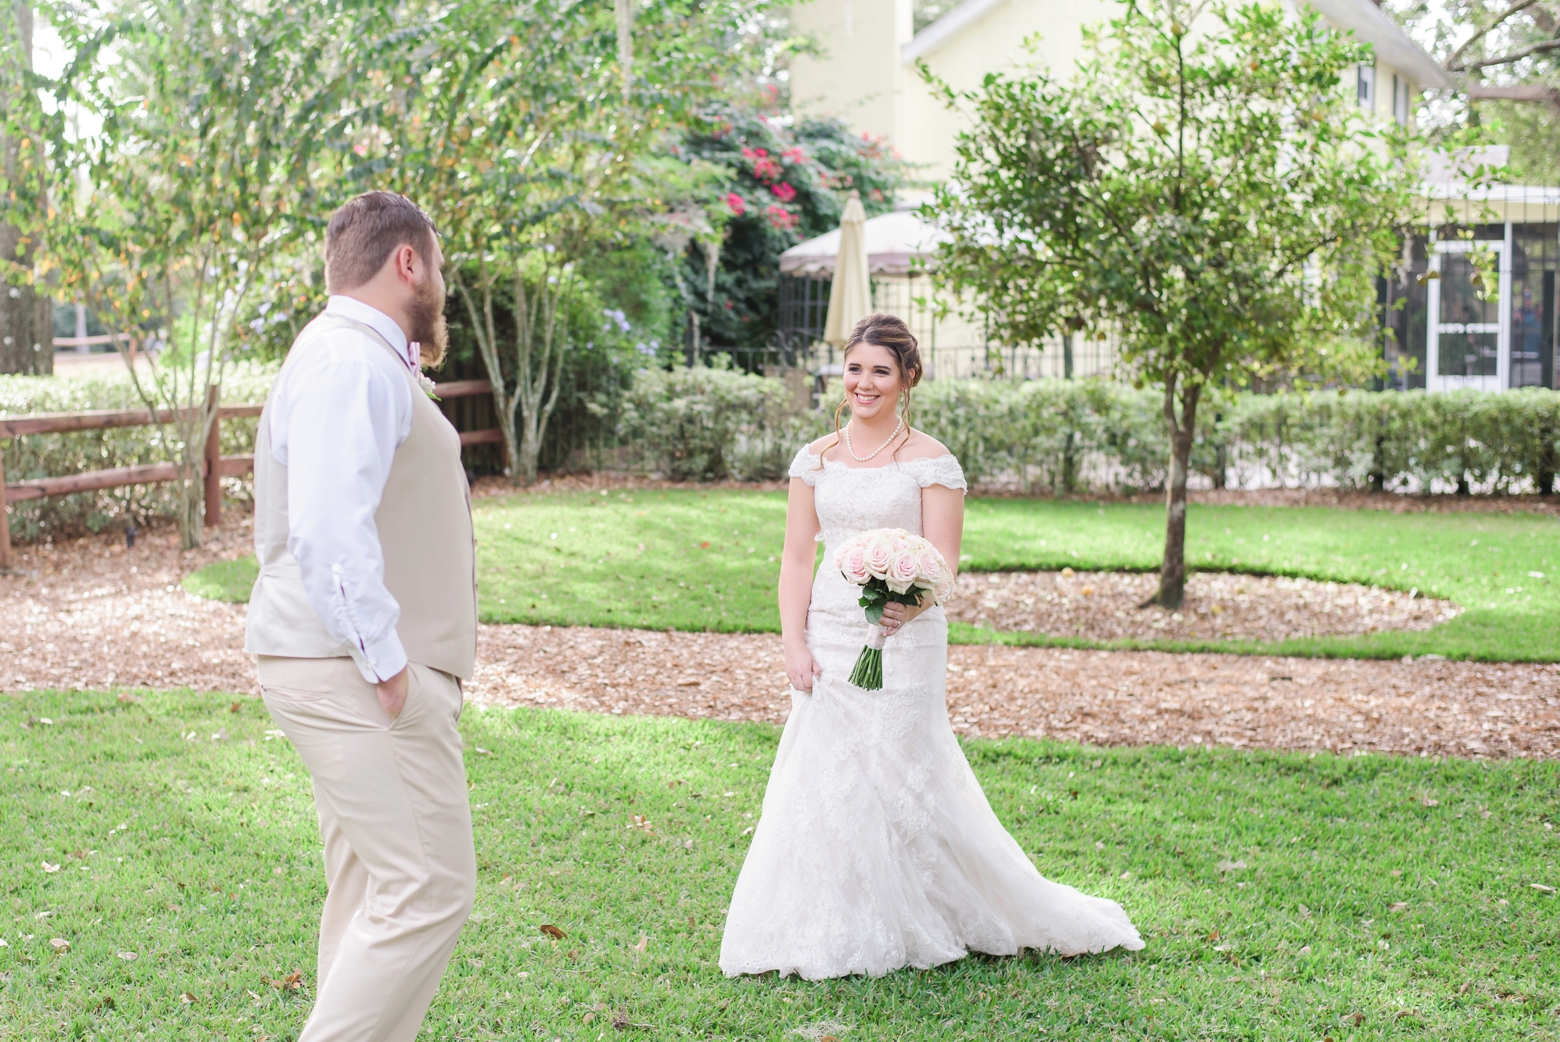 Bride and Groom share a lovely first look before their cross creek wedding ceremony in rural Tampa, FL